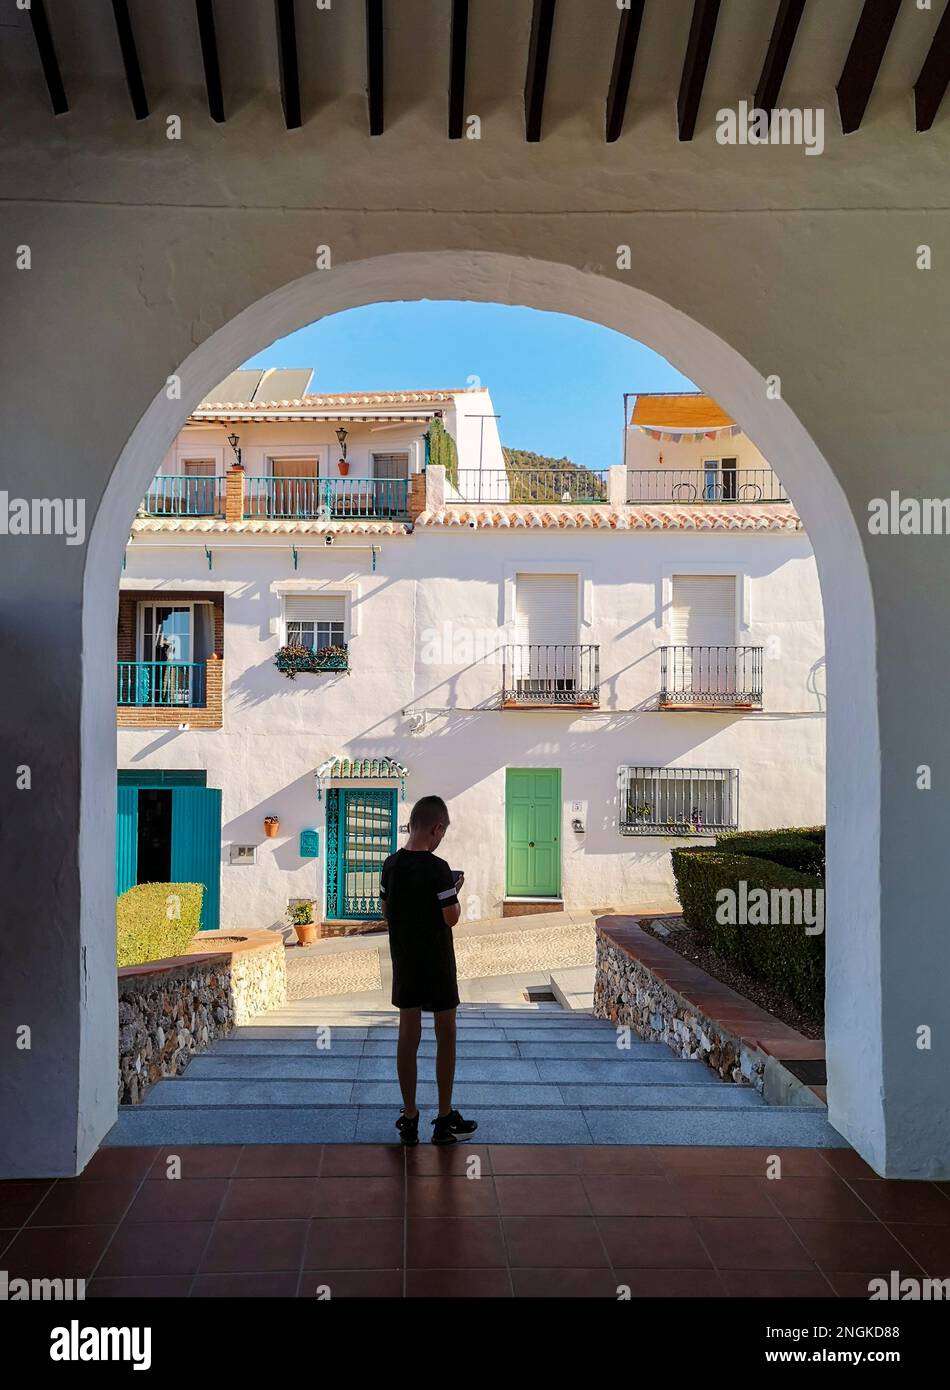 A young boy checking his phone below an arch in the white village of Frigiliana, Malaga Province, Andalucia, Spain. Stock Photo